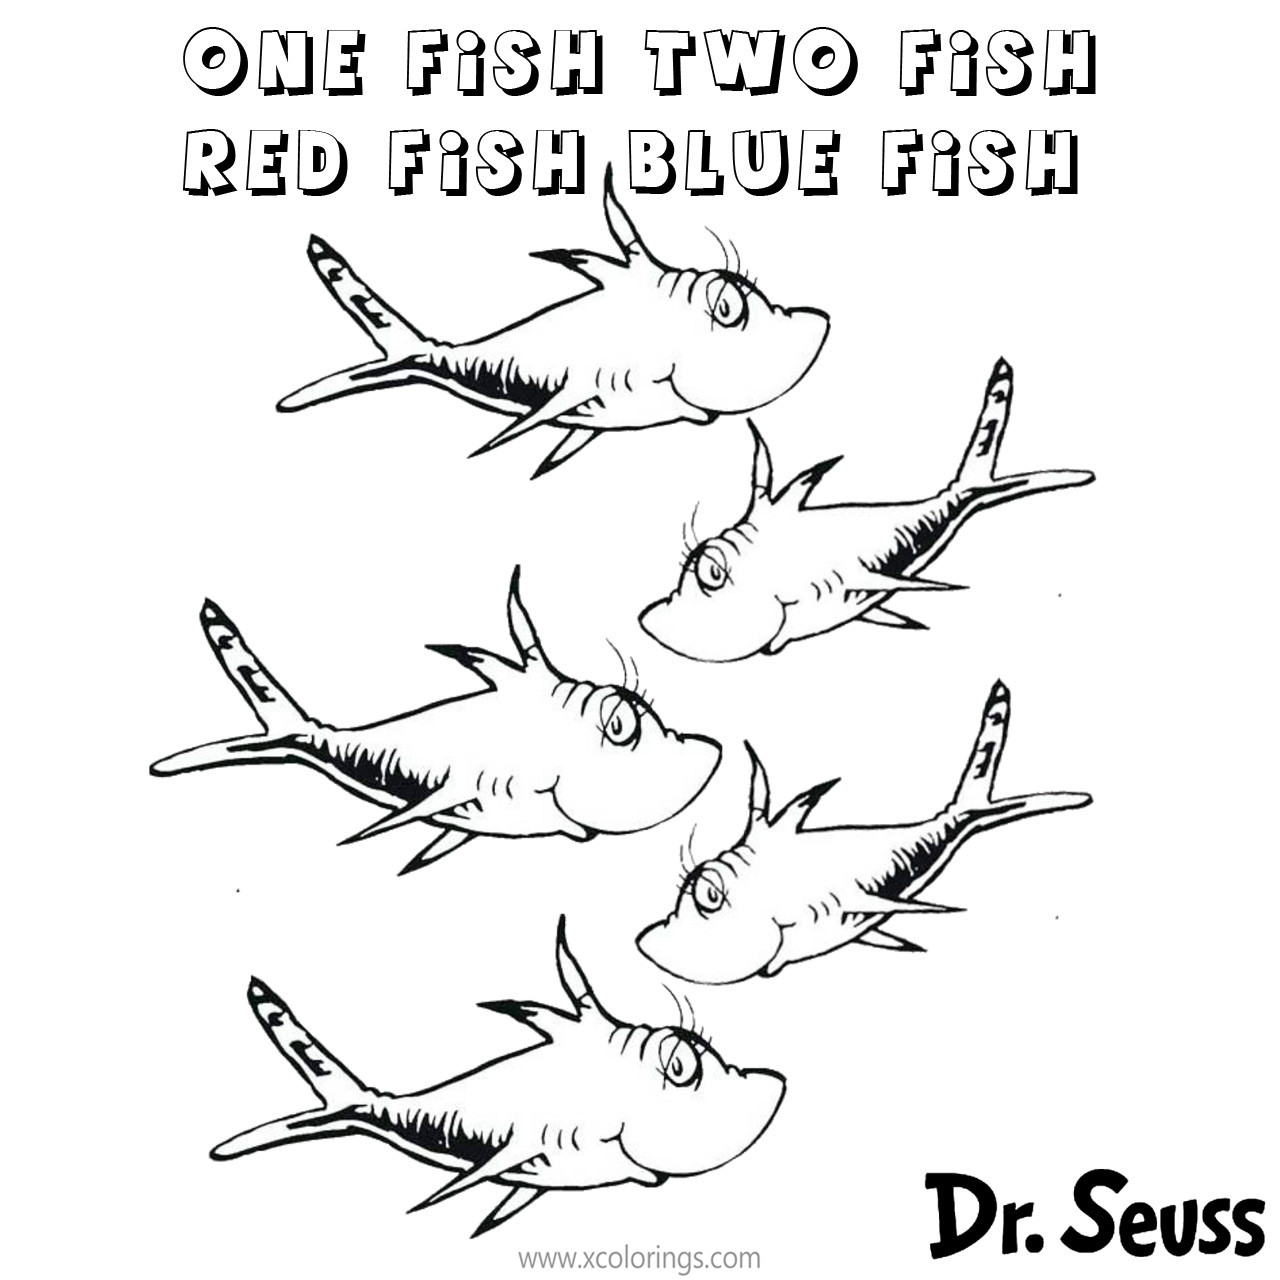 Free One Fish Two Fish Coloring Pages from Dr. Seuss Books printable